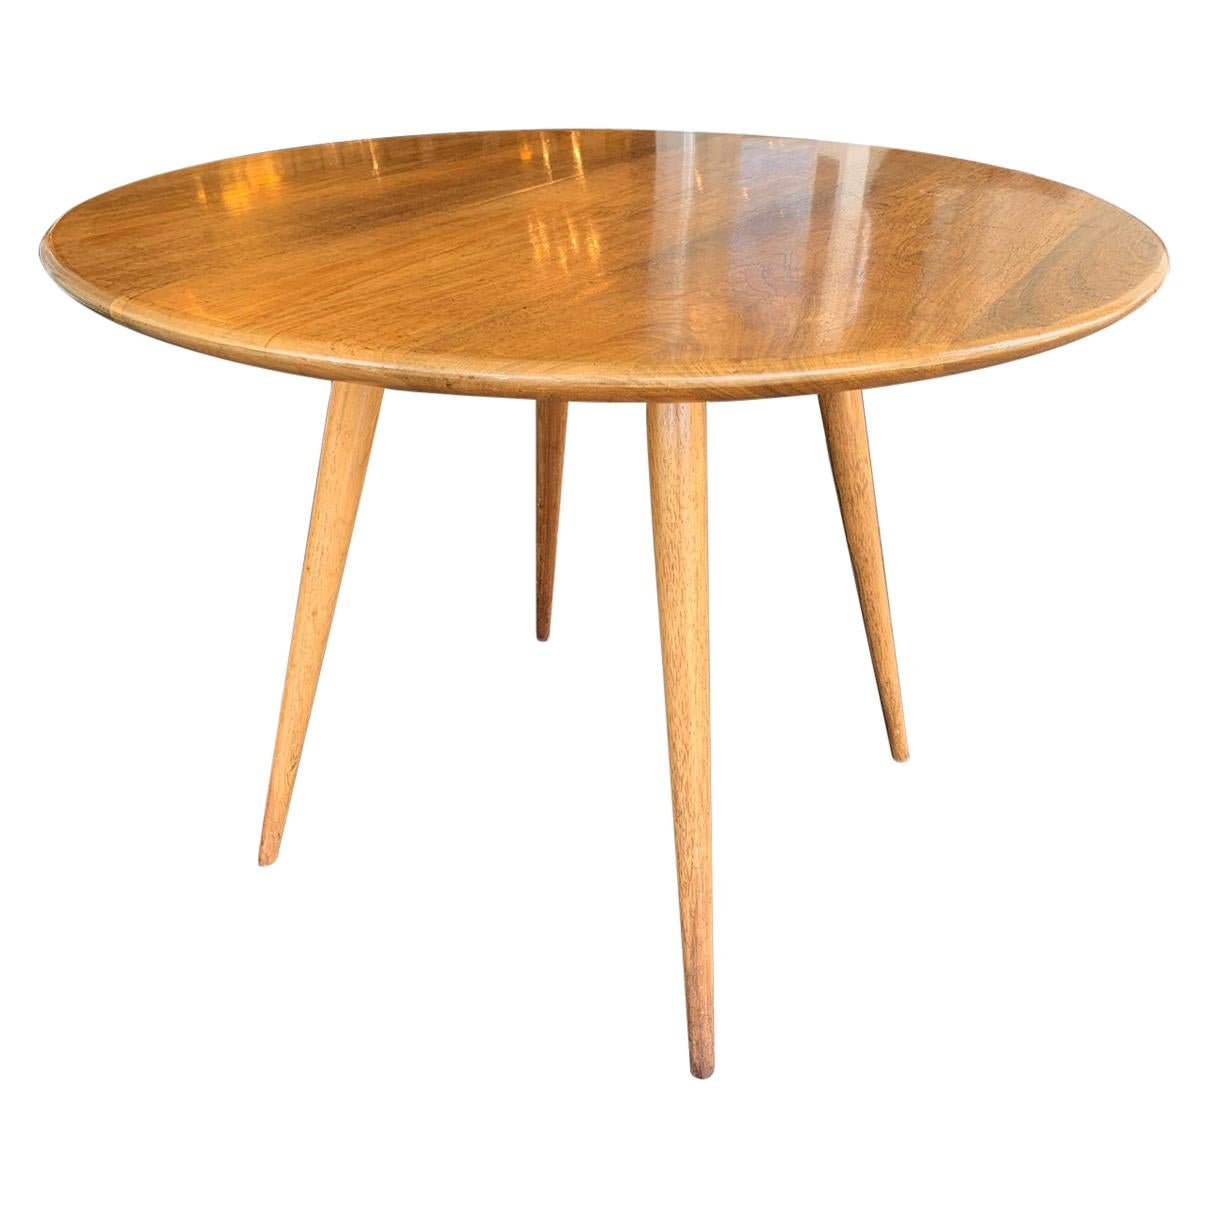 Mid-20th Century Round Walnut Dinning Table For Sale